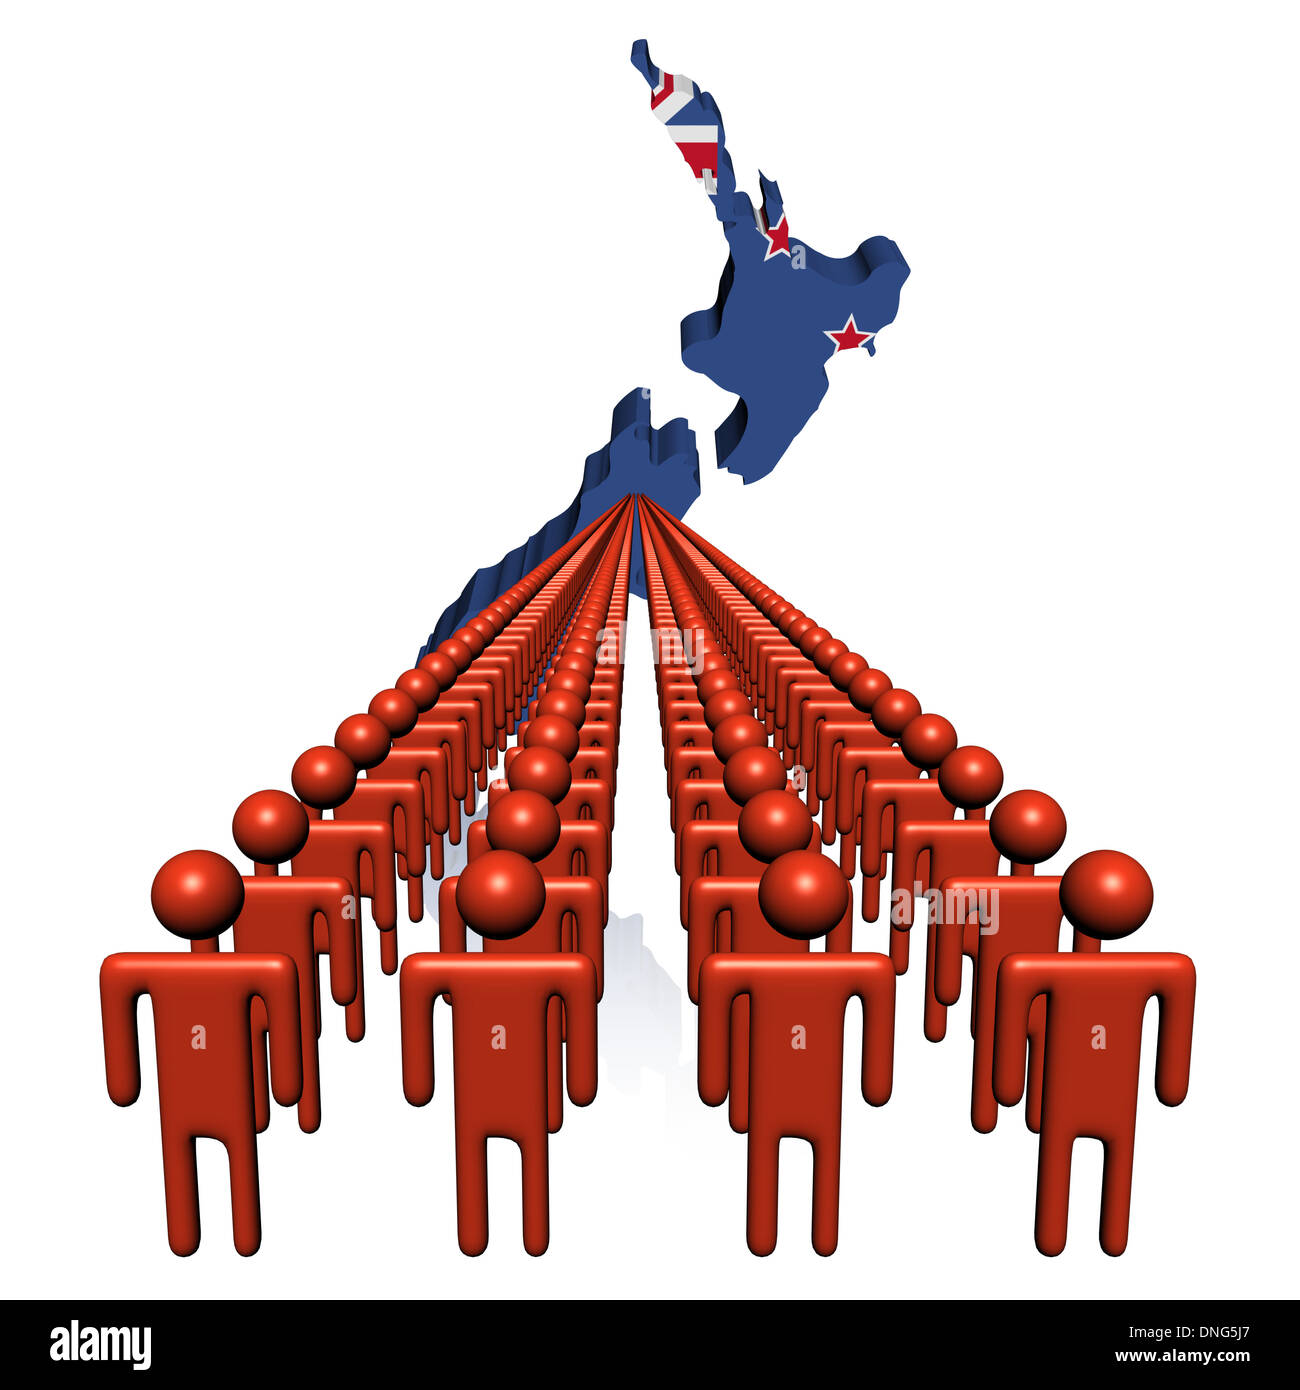 Lines of people with New Zealand map flag illustration Stock Photo